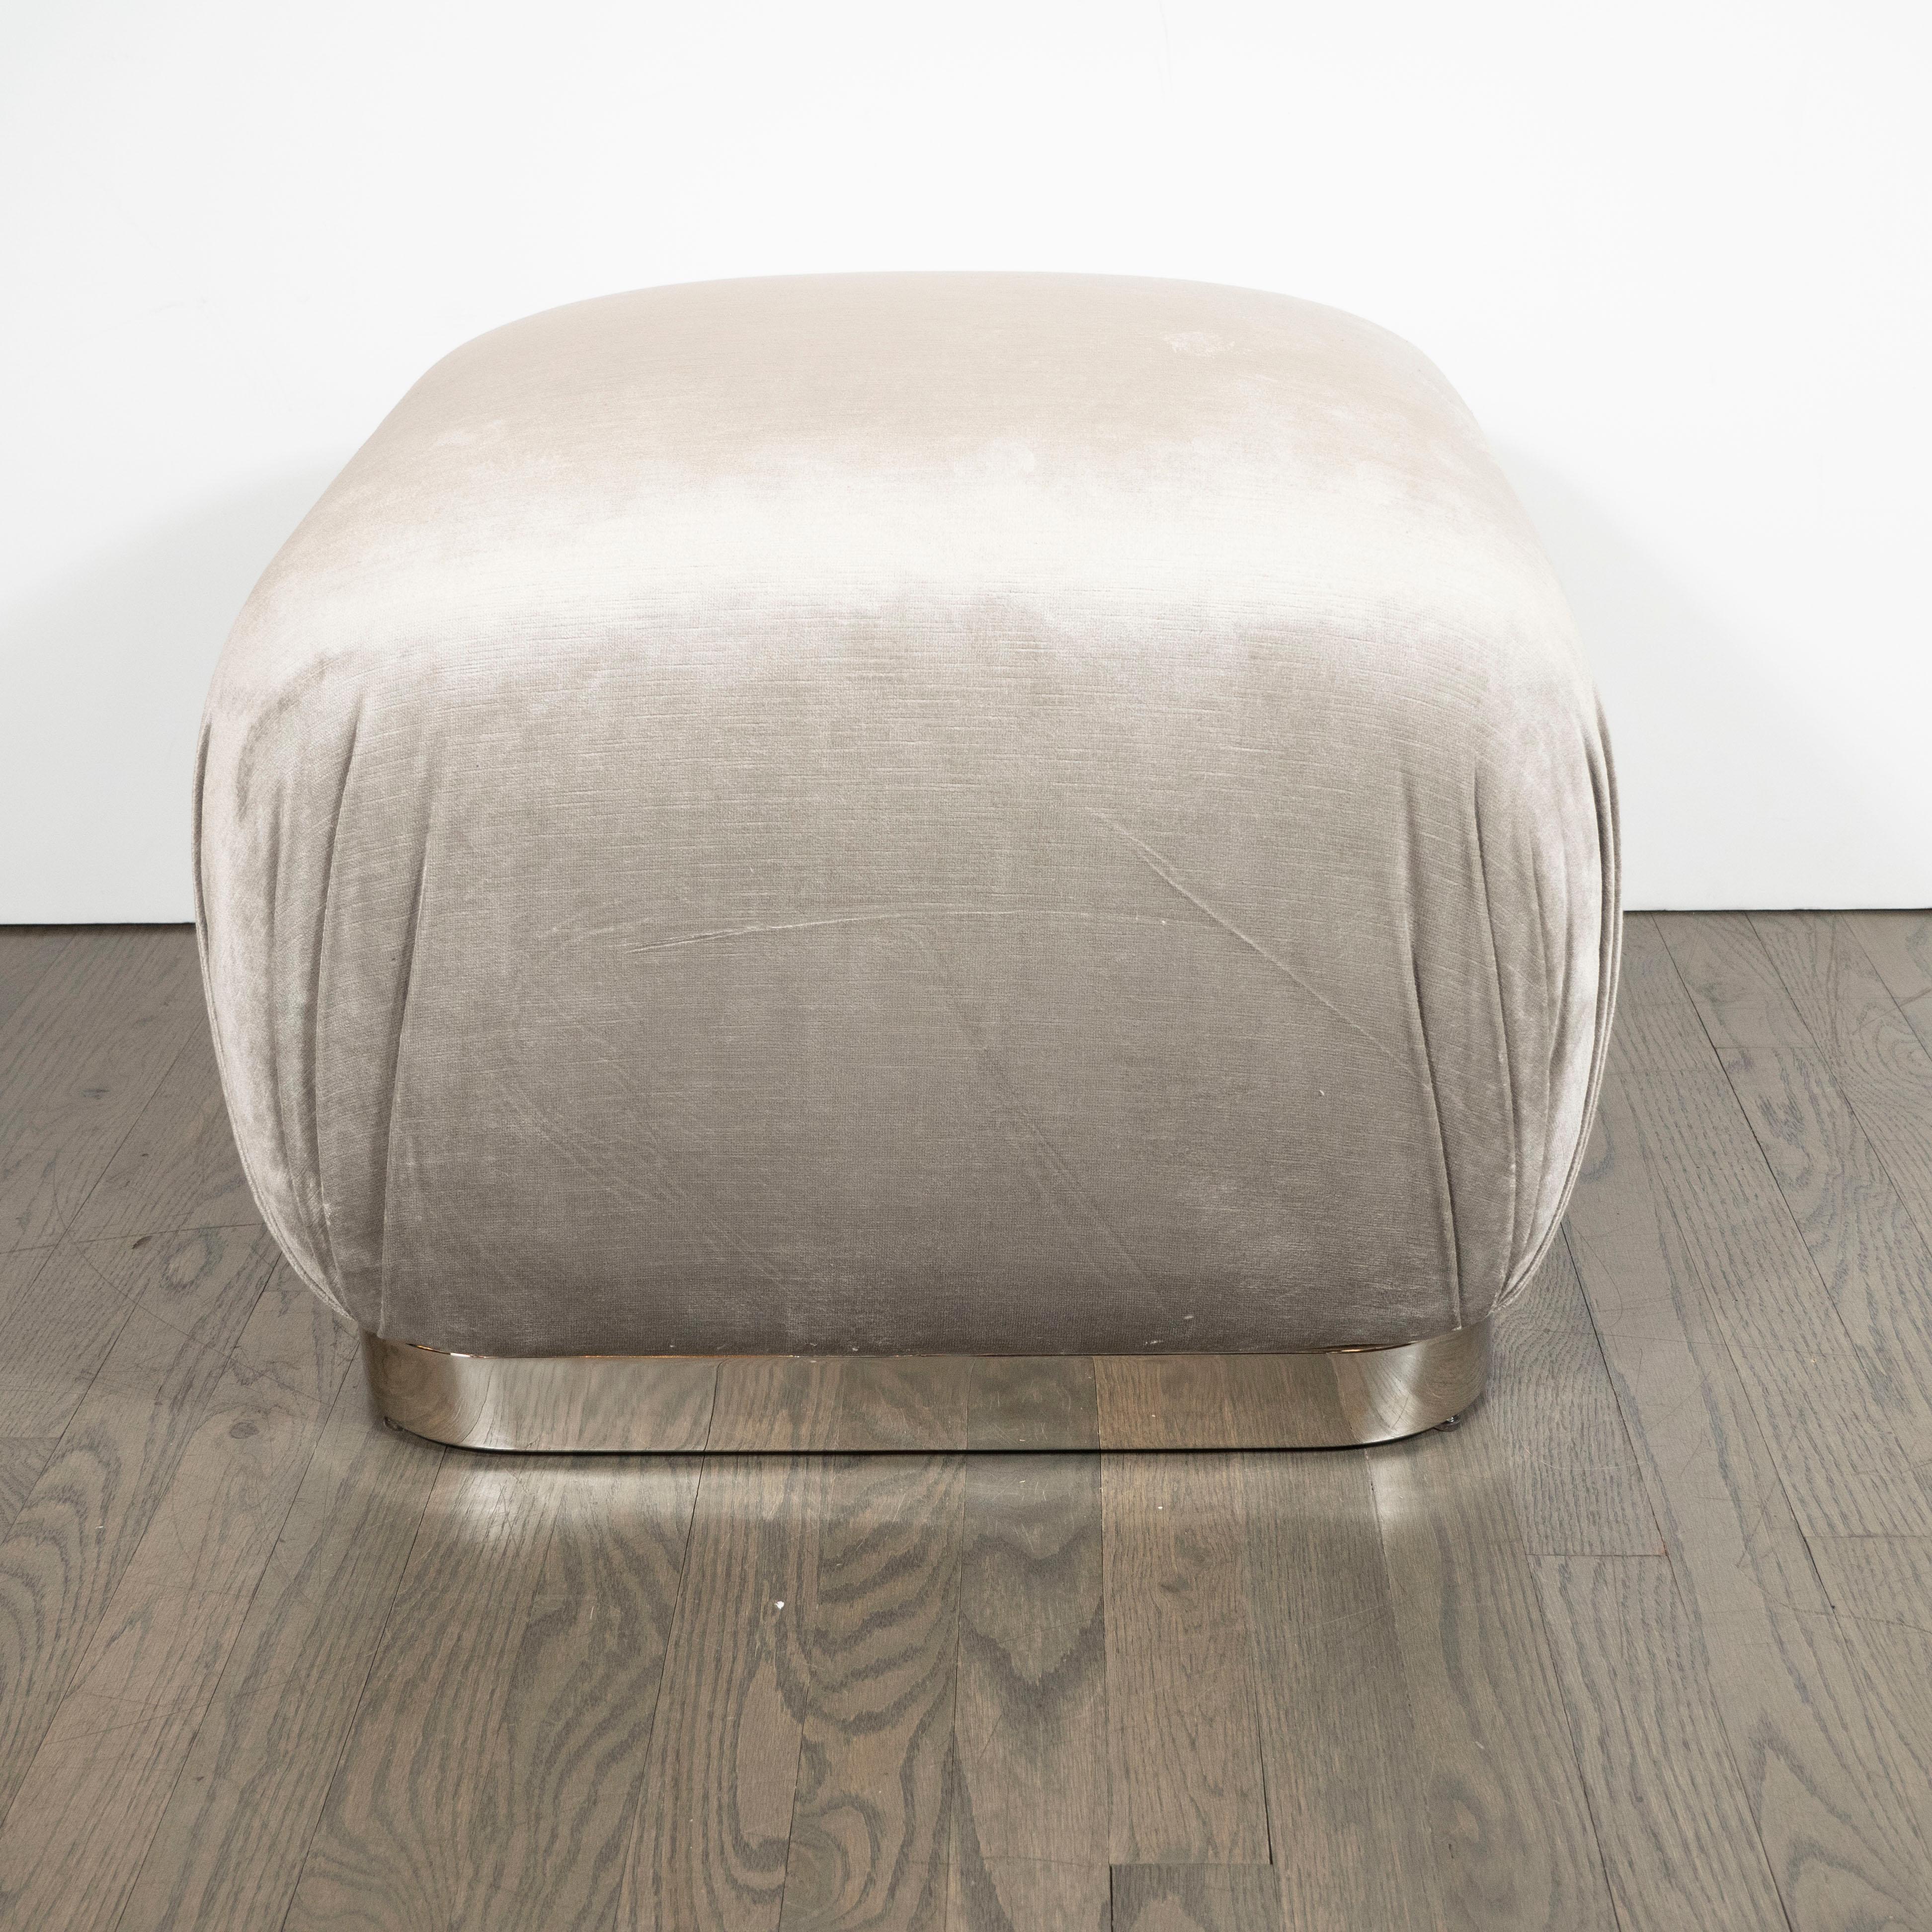 This sophisticated Mid-Century Modernist soufflé pouf, realized in the manner of Karl Springer, feature a lustrous square chrome bases with rounded edges and platinum velvet upholstery. With its austere lines and luxe materials, this piece manage to